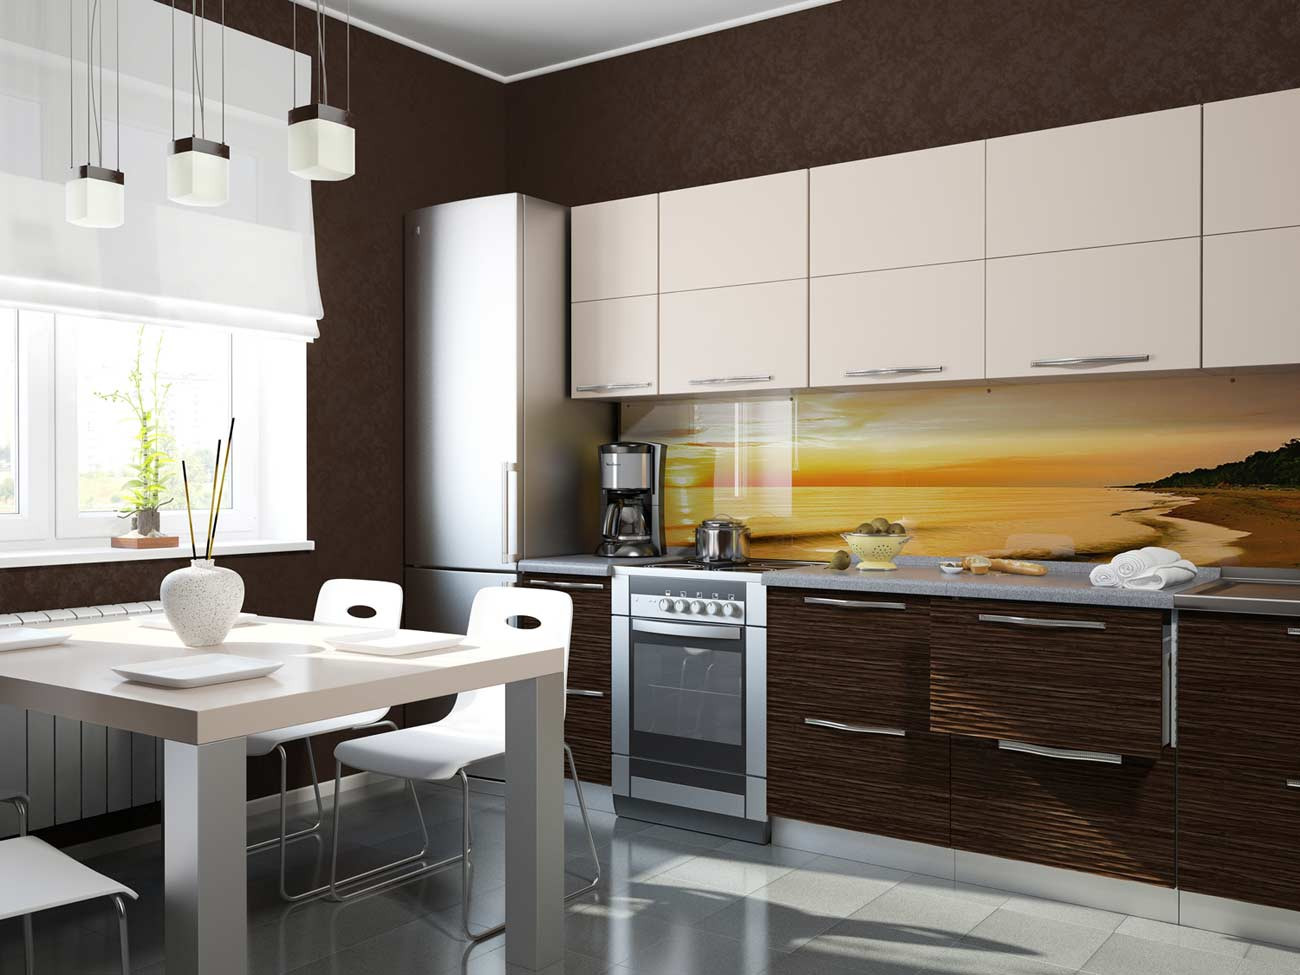 Kitchen Wall Coverings
 Choosing the best kitchen wall panels from different materials